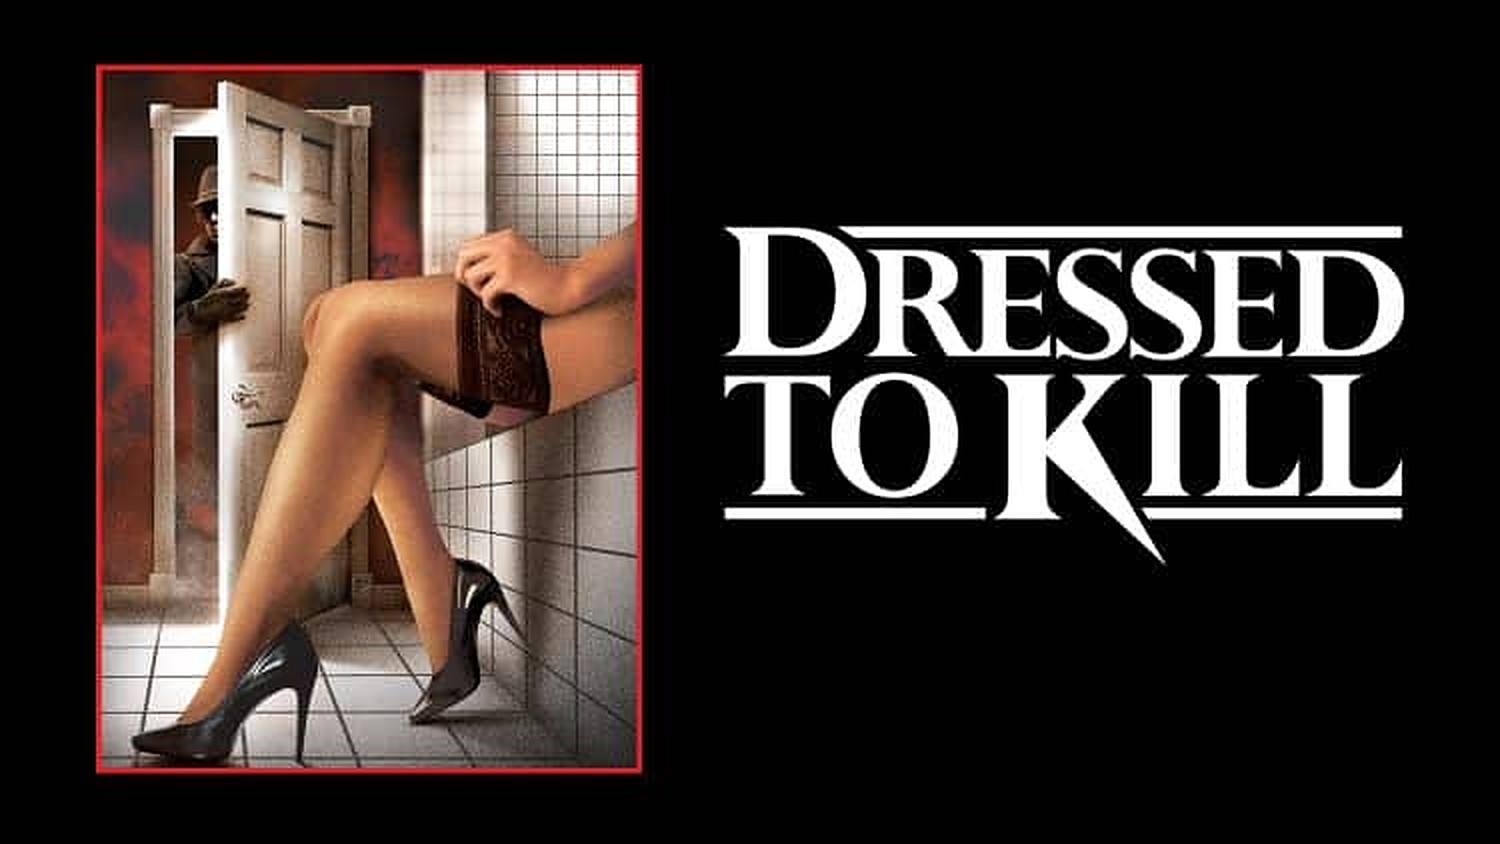 46-facts-about-the-movie-dressed-to-kill